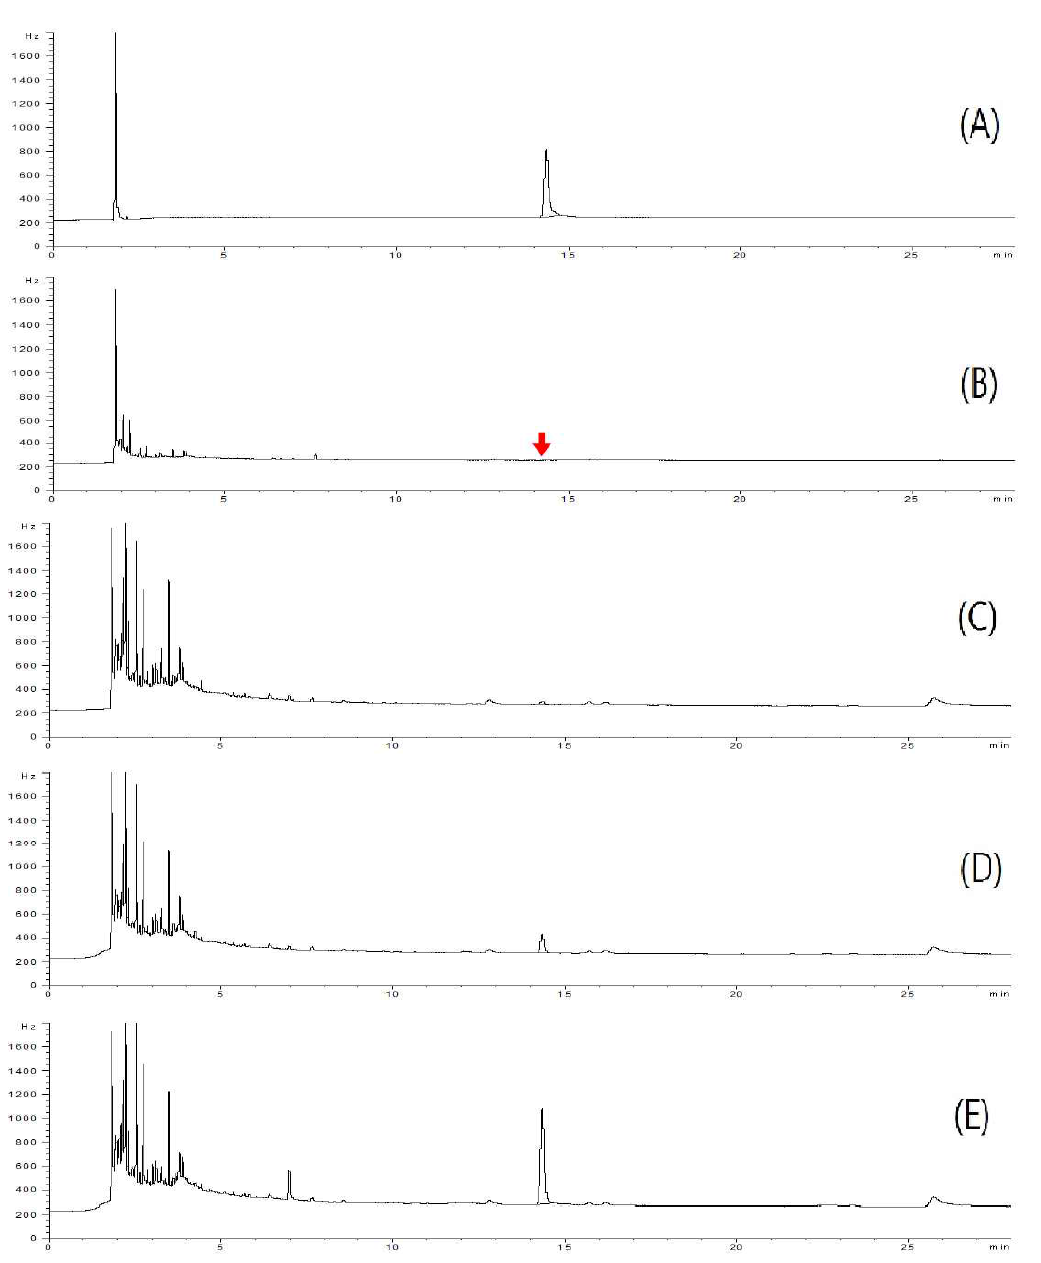 GC-ECD chromatograms corresponding to: A, standard solution at 0.5 mg/kg; B, control soybean; C, spiked at 0.01 mg/kg; D, spiked at 0.1 mg/kg; and E, spiked at 0.5 mg/kg